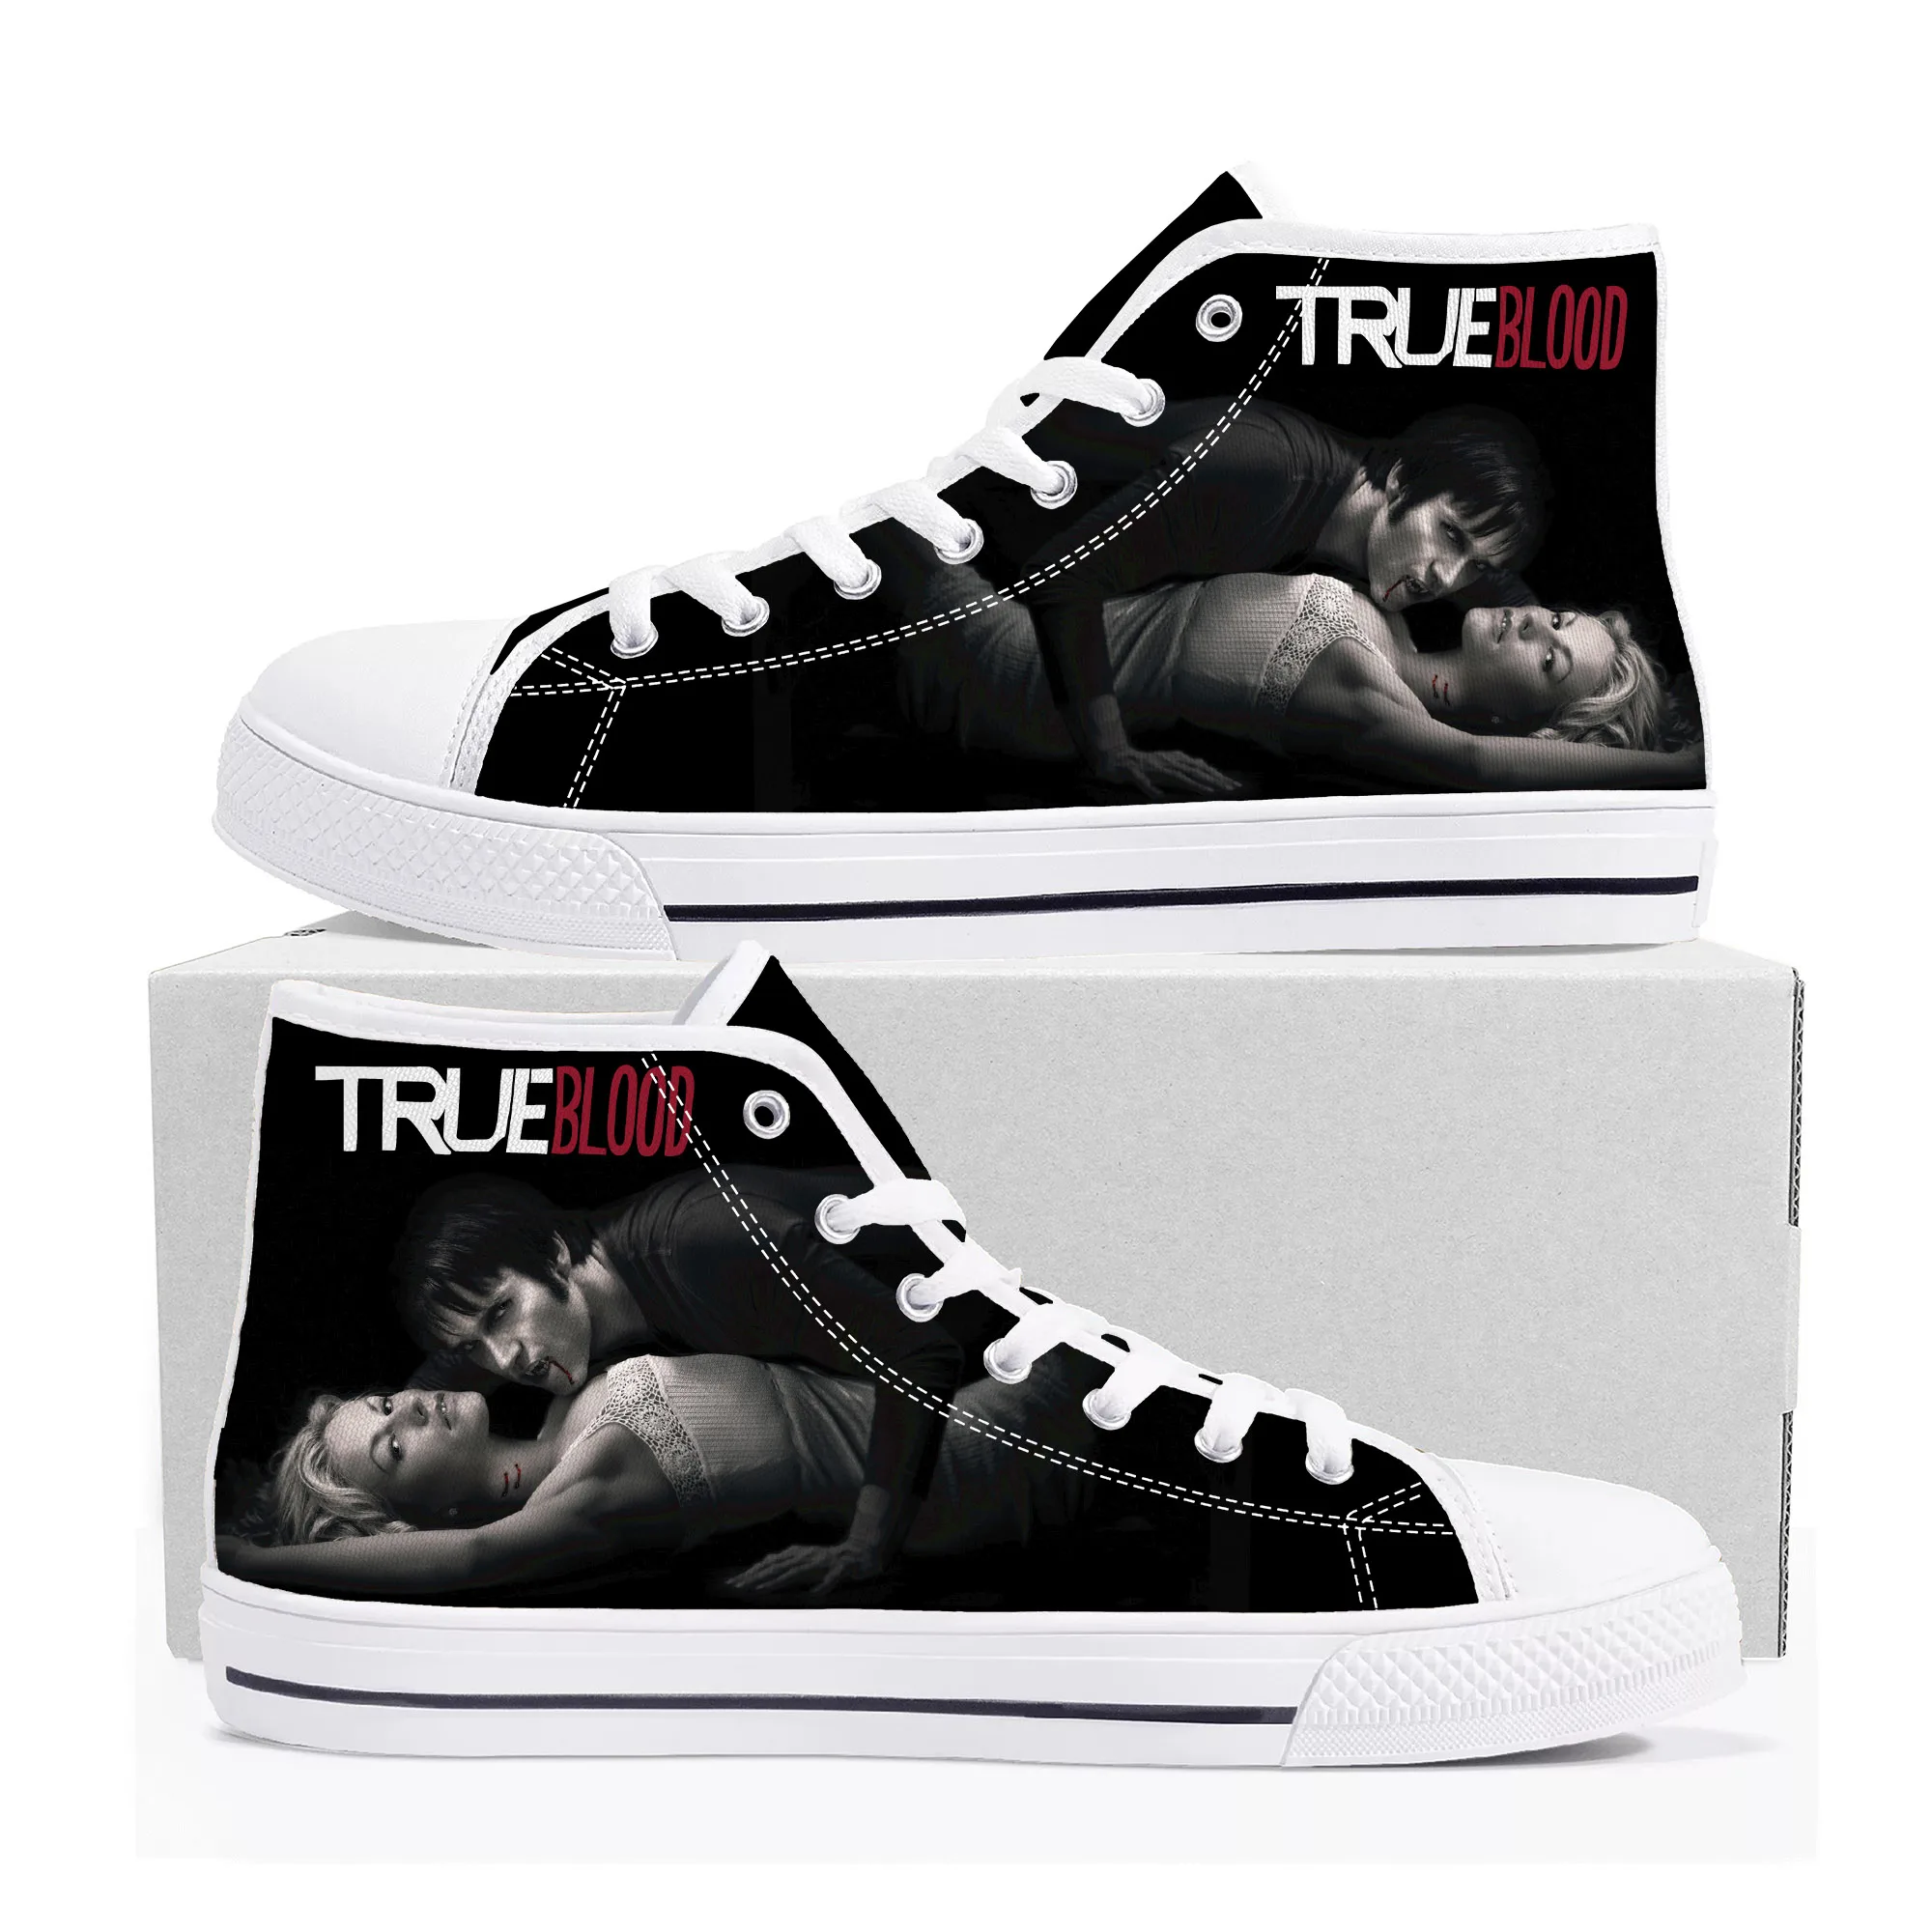 

True Blood High Top Sneakers Mens Womens Teenager Anna Paquin Stephen Moyer Canvas Sneaker couple Casual Shoe Customize Shoes